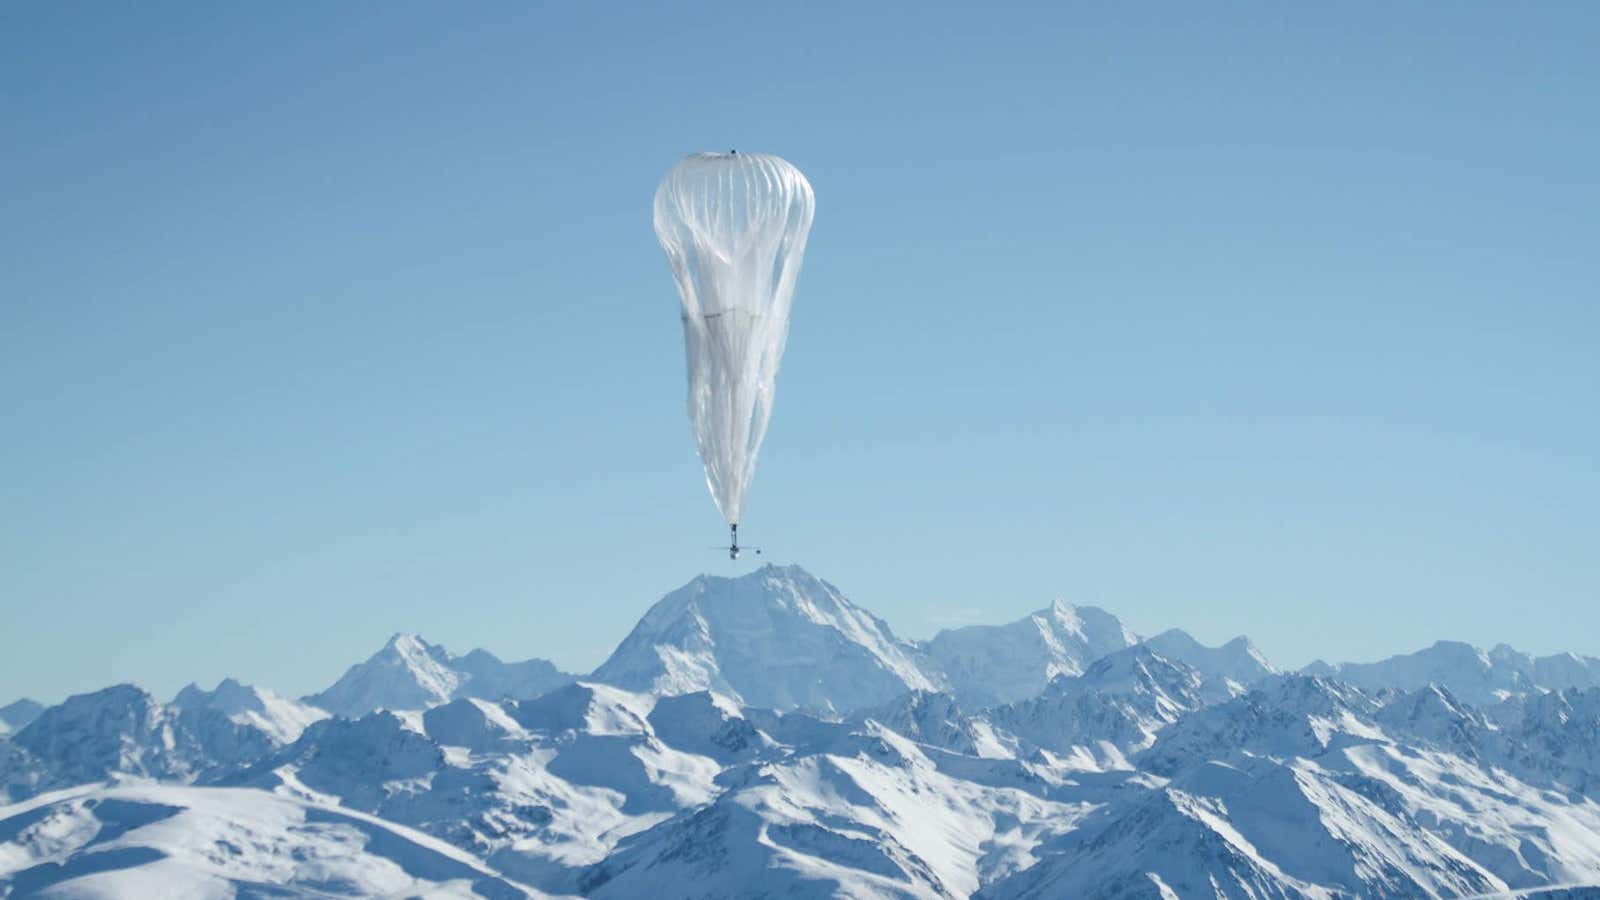 A Project Loon balloon in New Zealand.